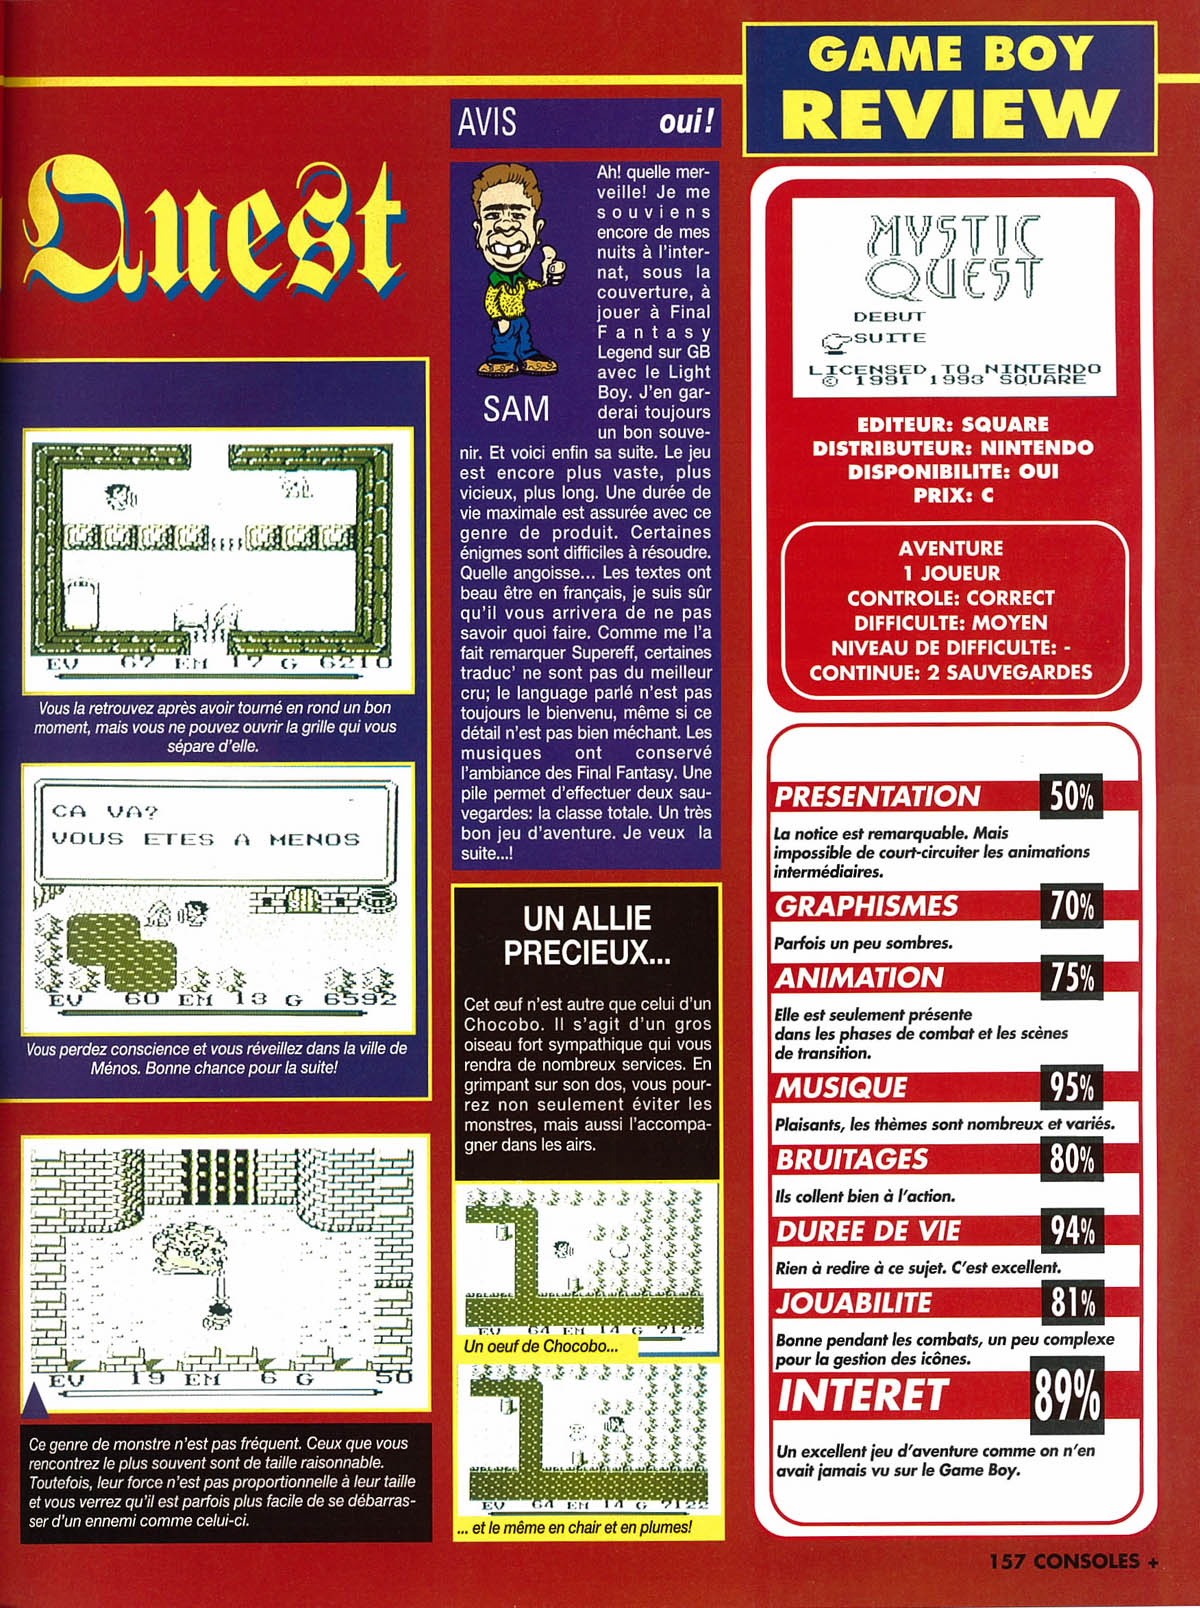 tests//765/Consoles + 023 - Page 157 (septembre 1993).jpg